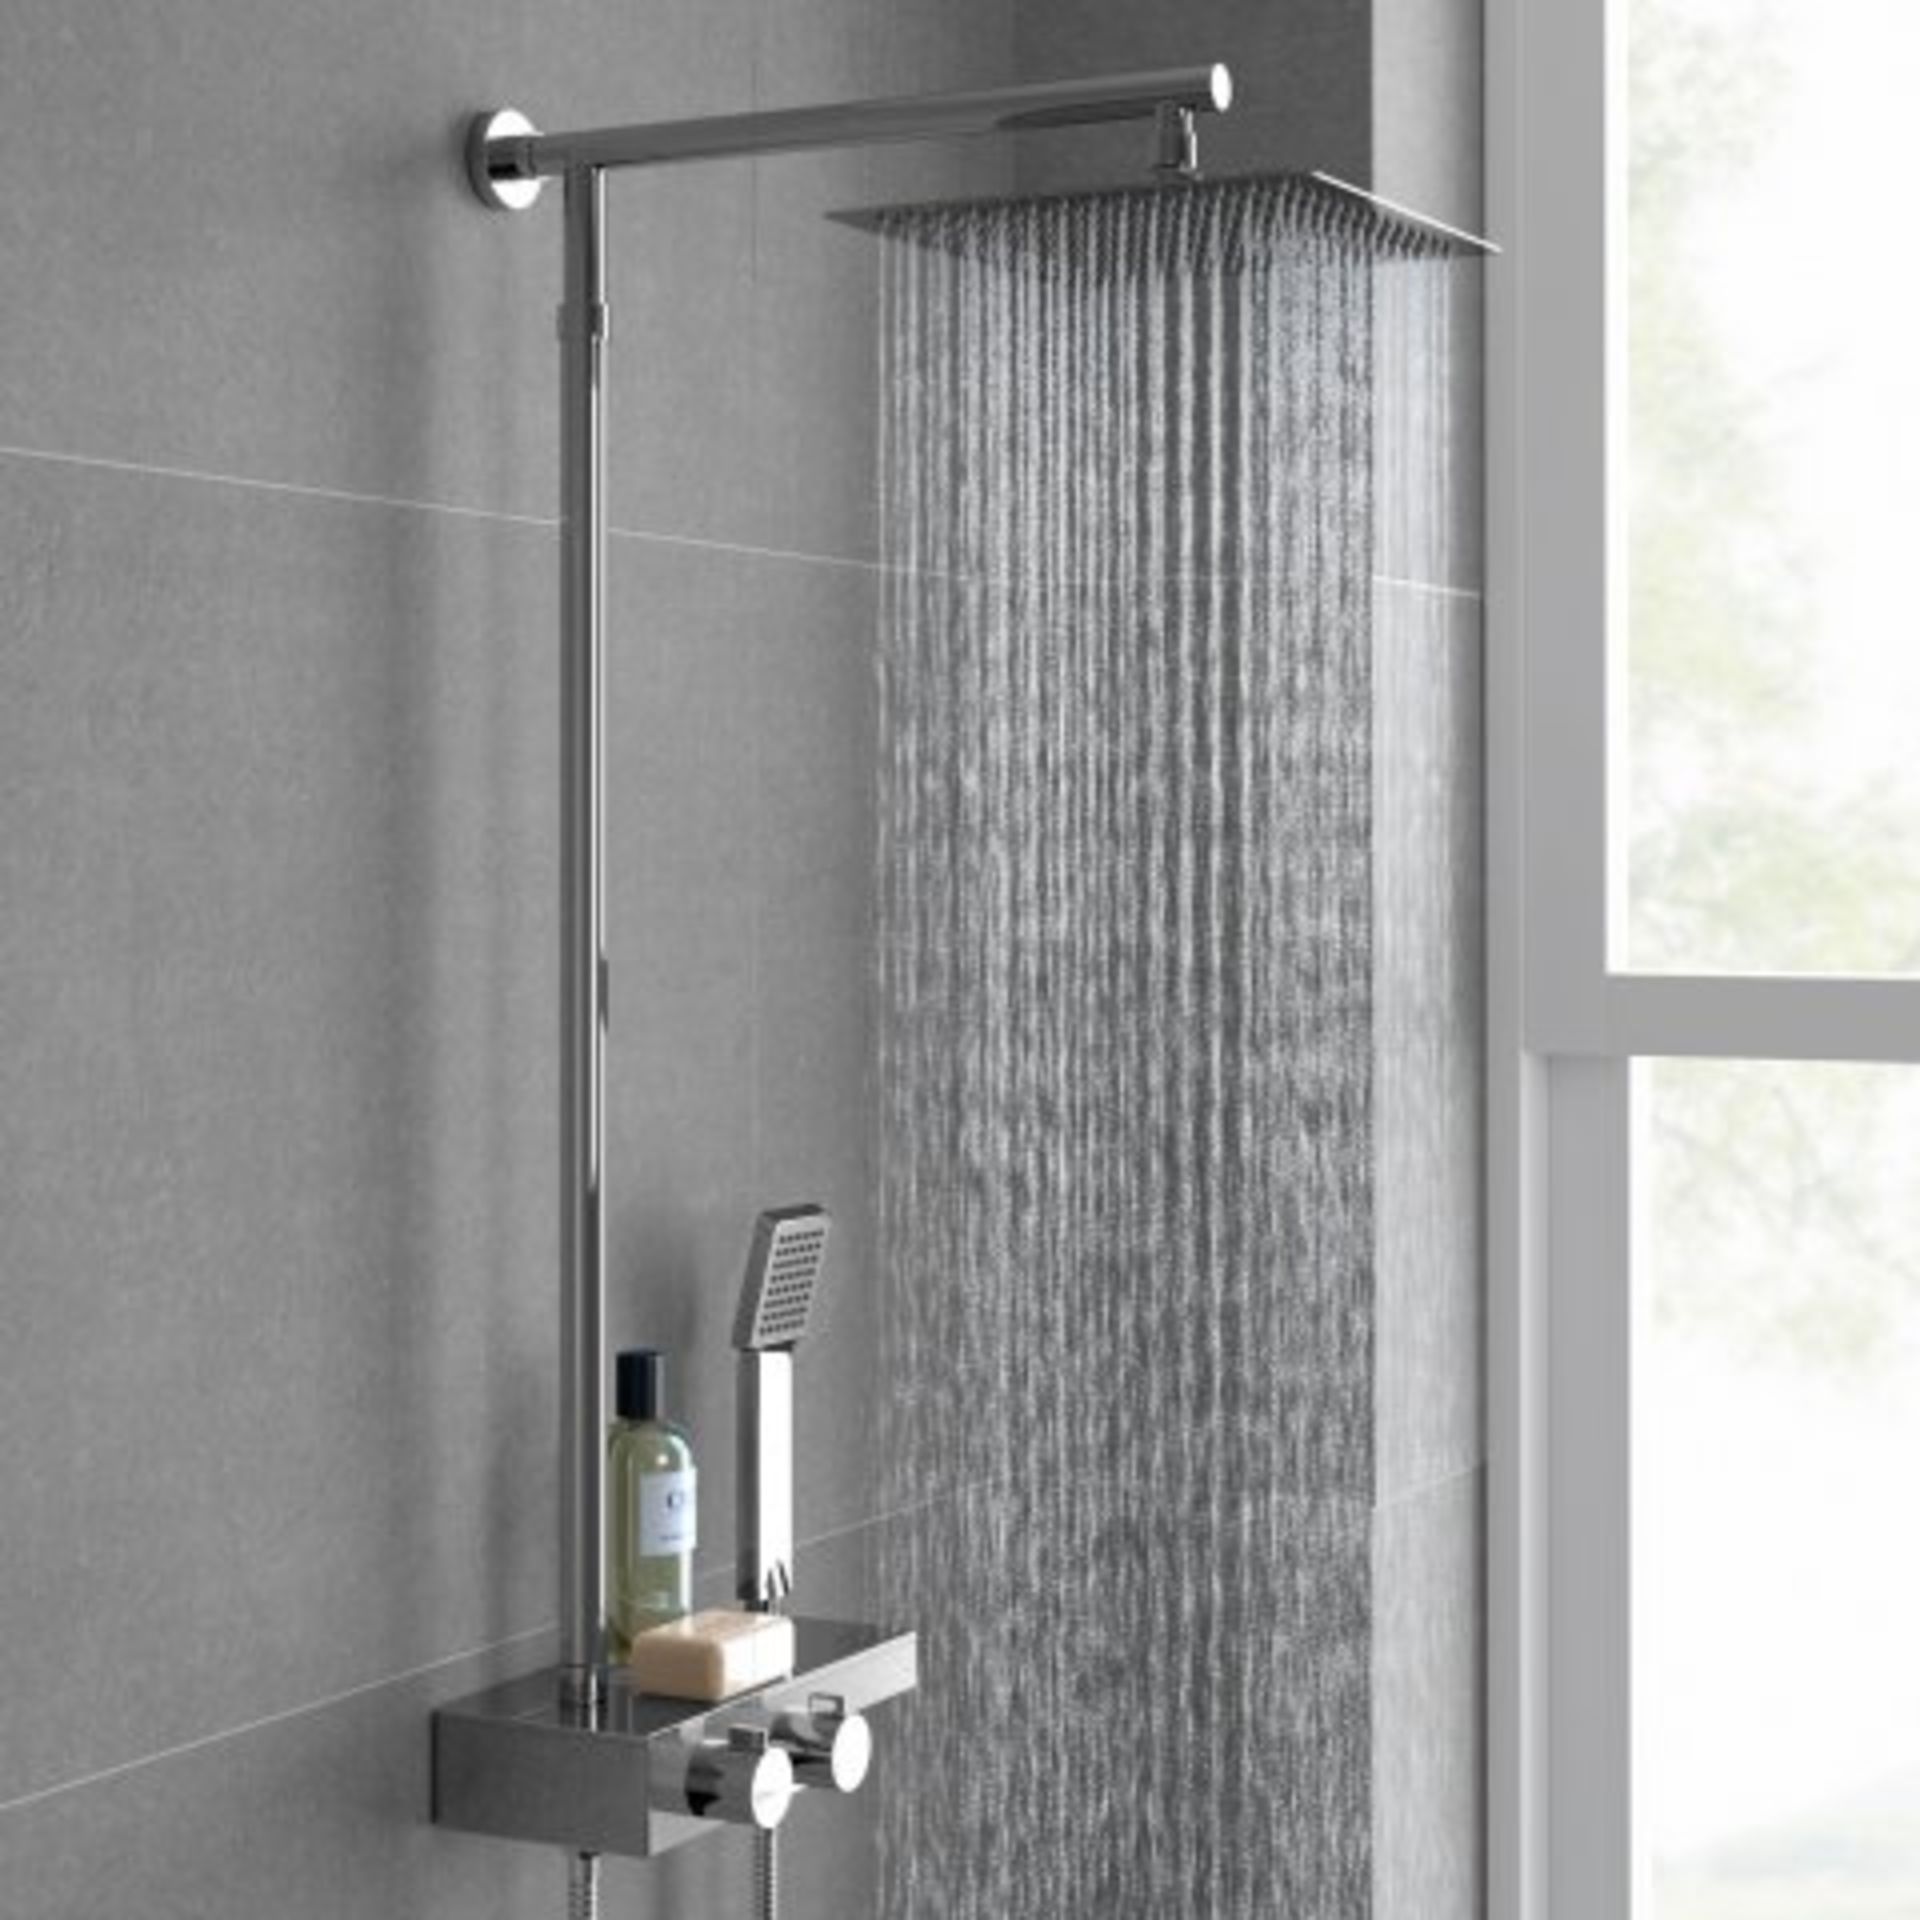 (2) 250mm Large Square Head Thermostatic Exposed Shower Kit, Handheld & Storage Shelf. RRP £349.